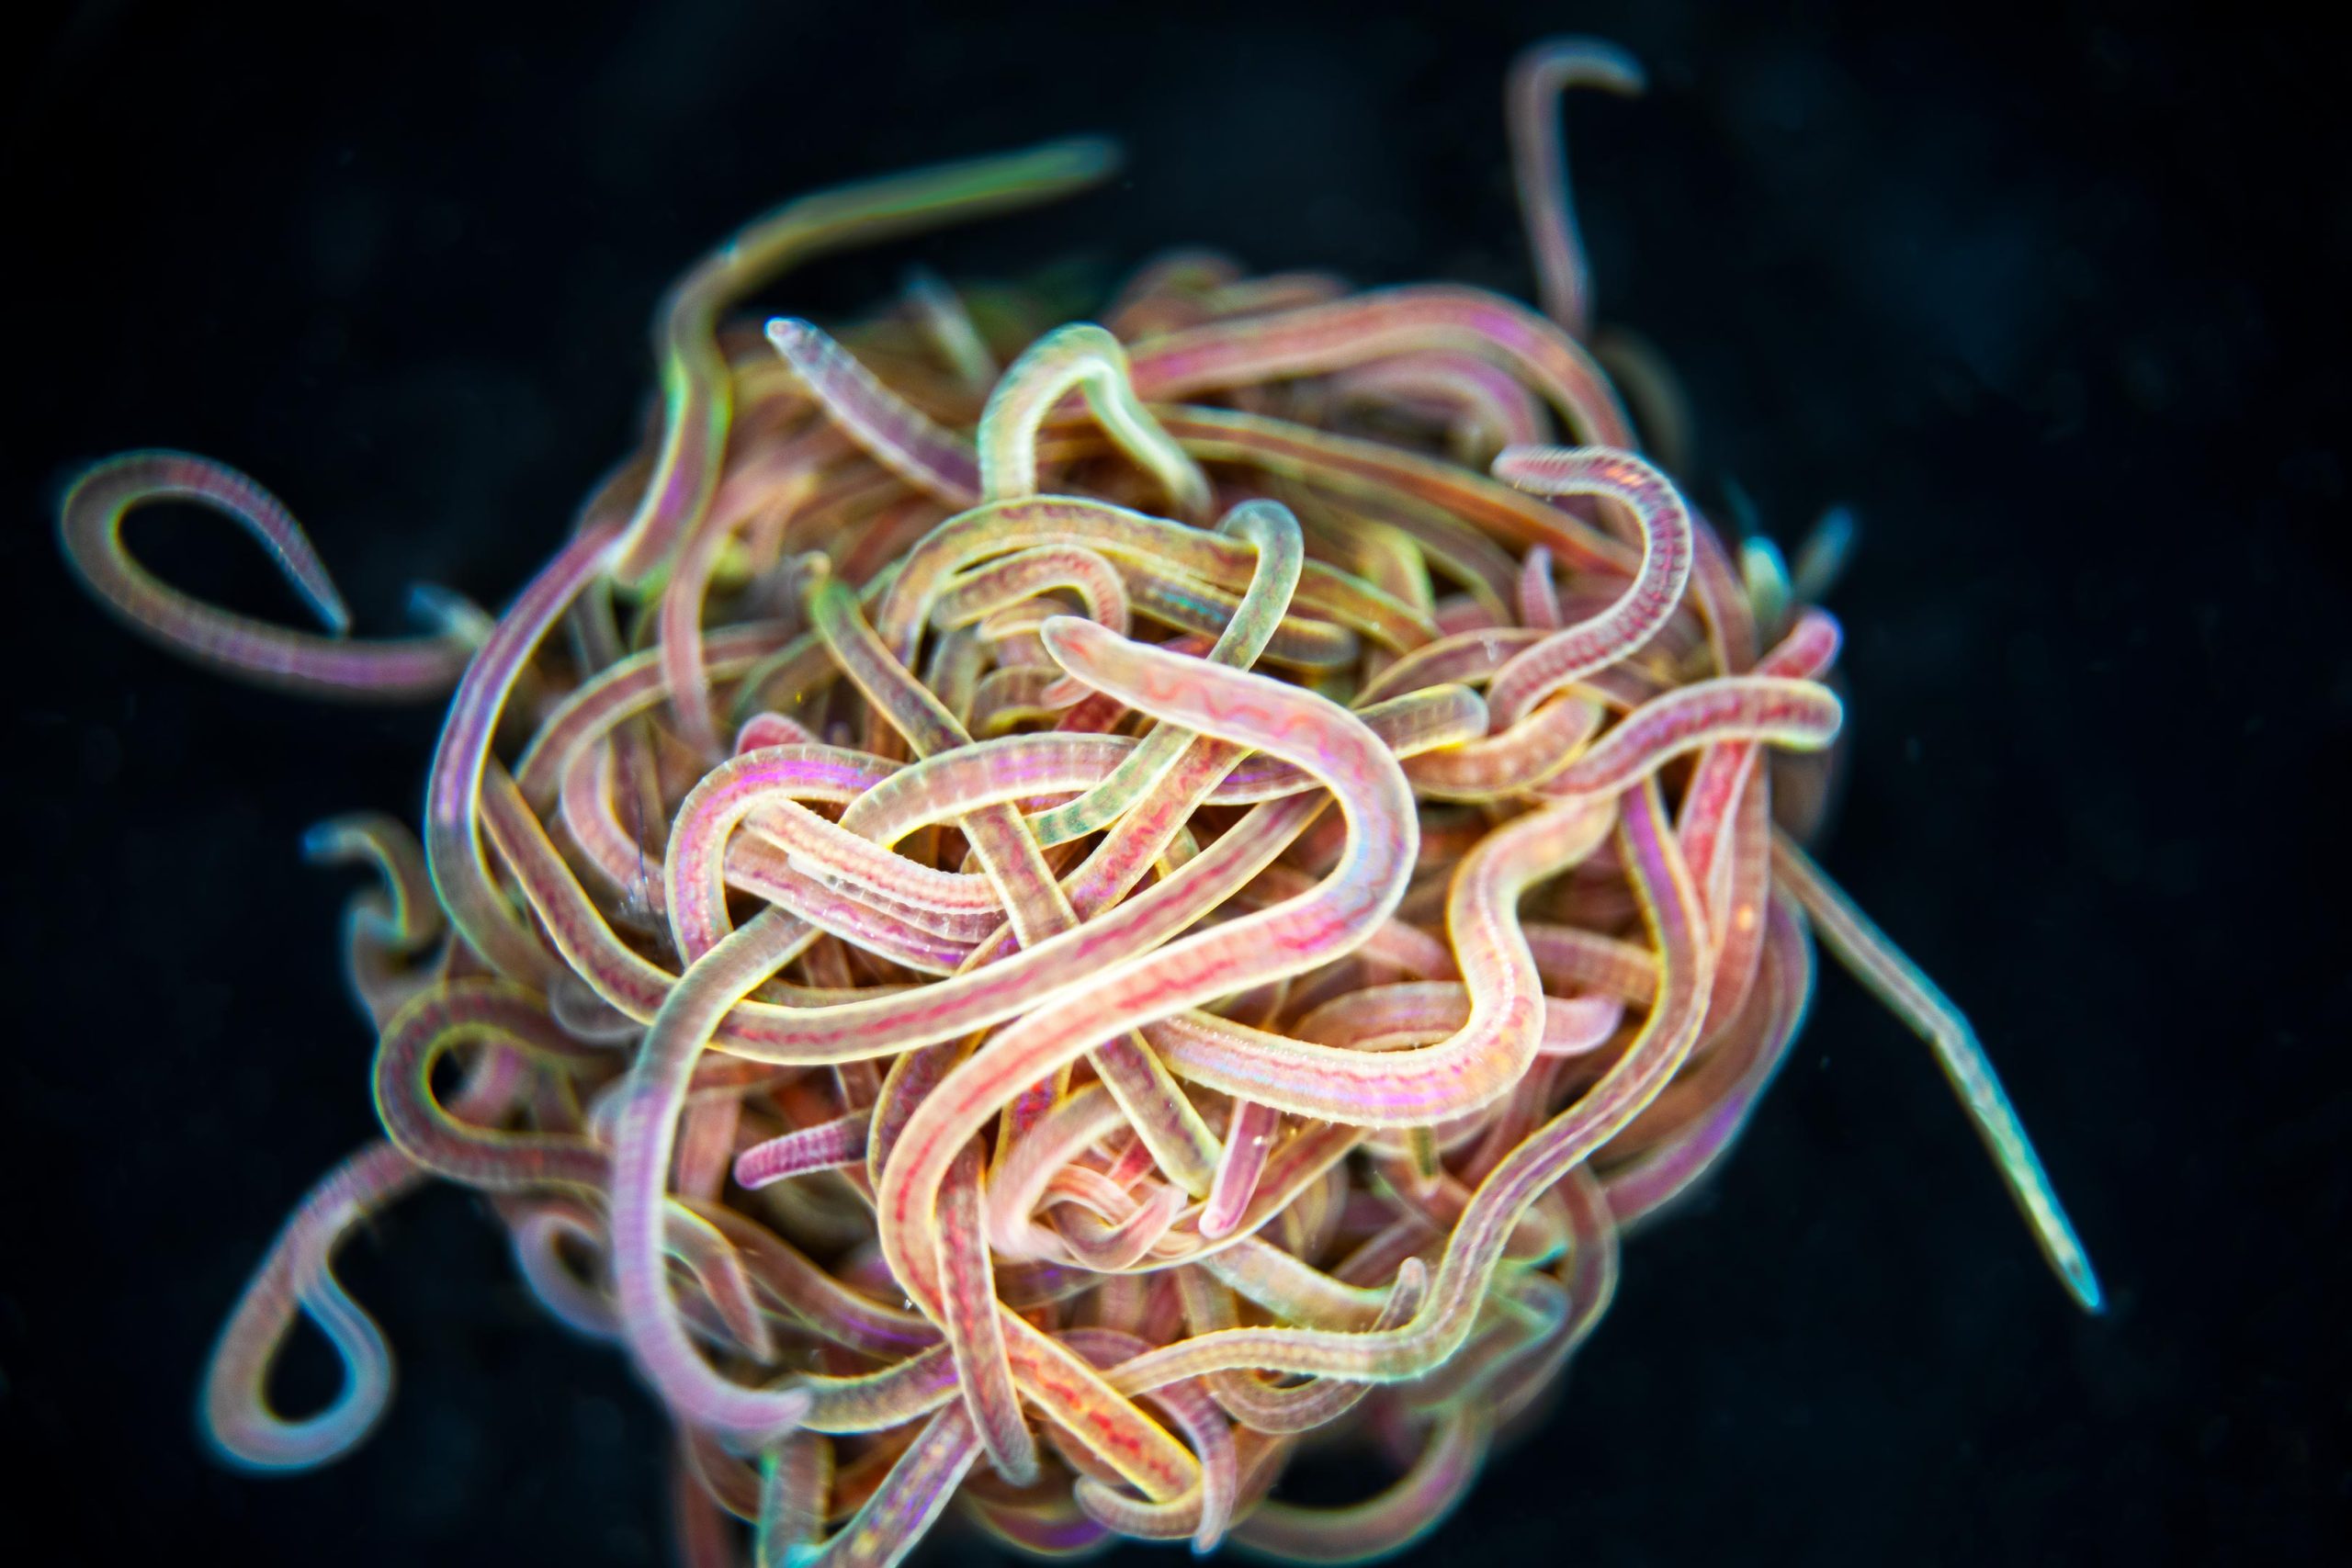 Knotty by Nature: Blackworms and the Secrets of Rapid Untangling